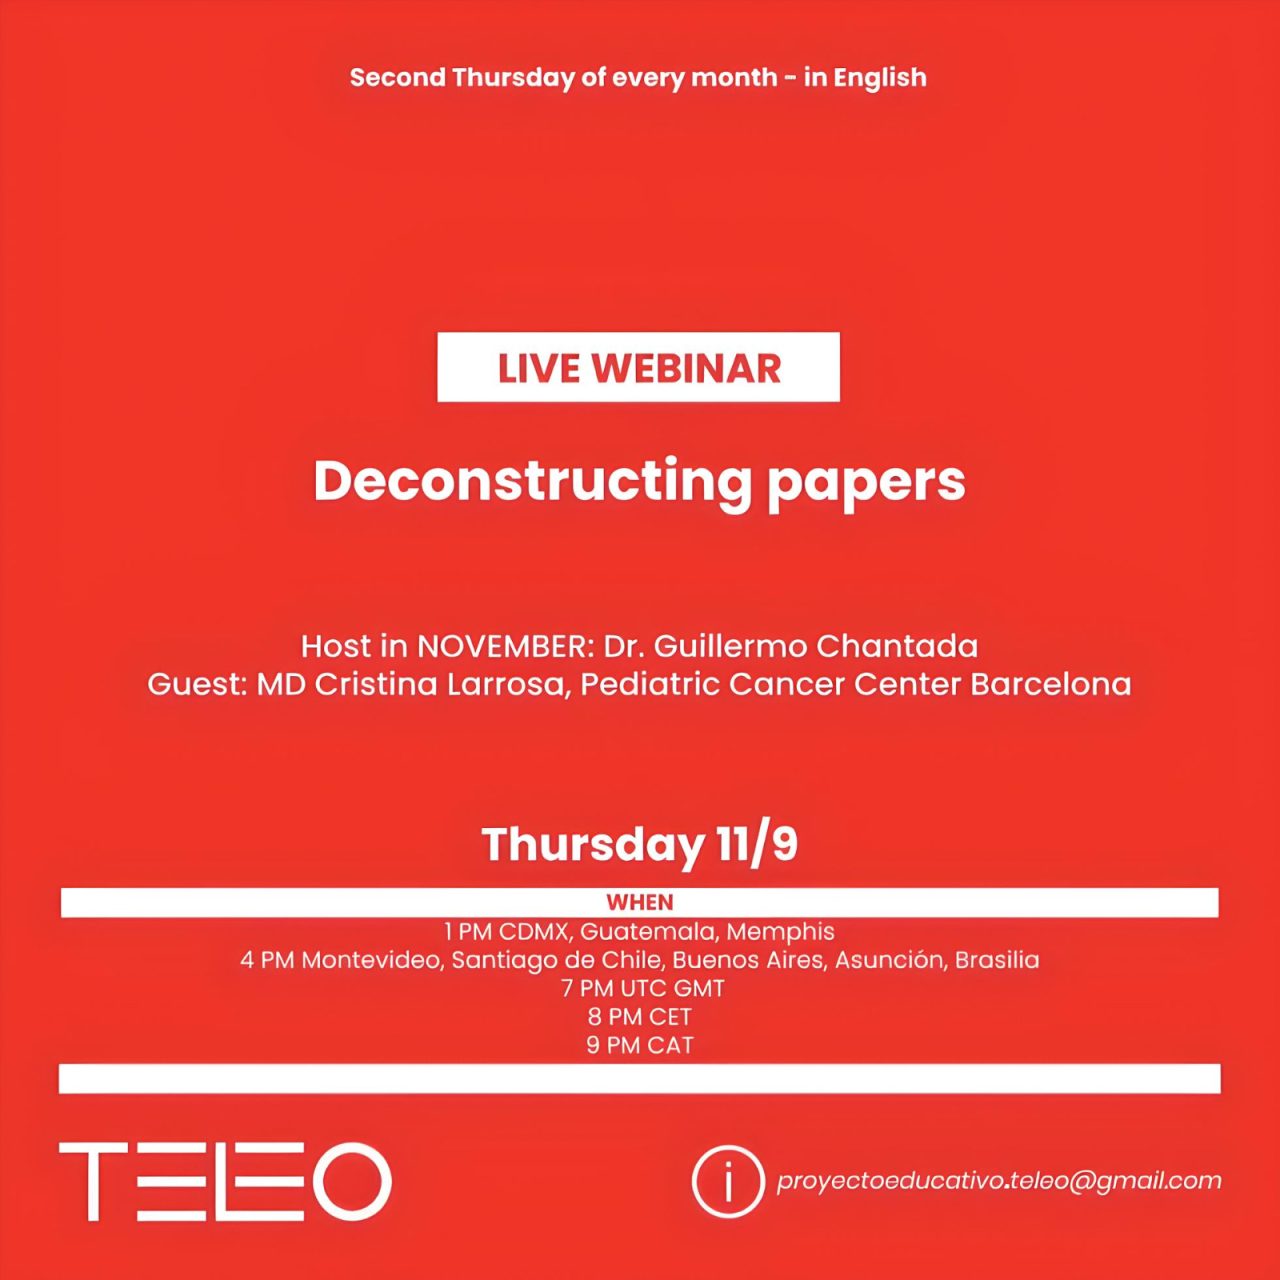 Save the date for “Deconstructing papers” webinar hosted by Guillermo Chantada – Programa TELEO